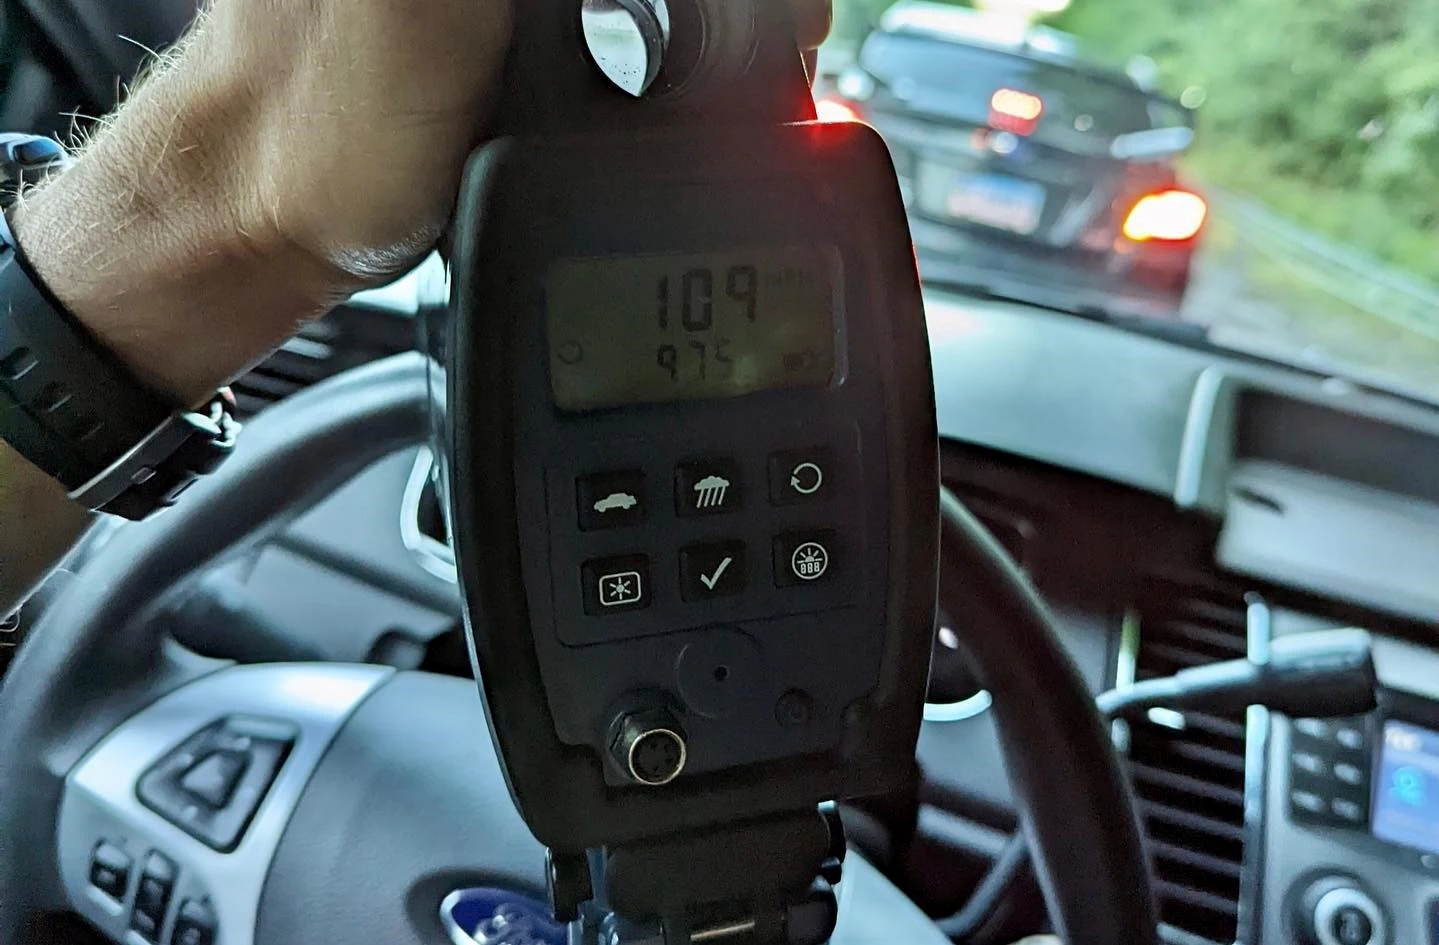 Connecticut State Troopers Clock Speedsters At 109 MPH and 94